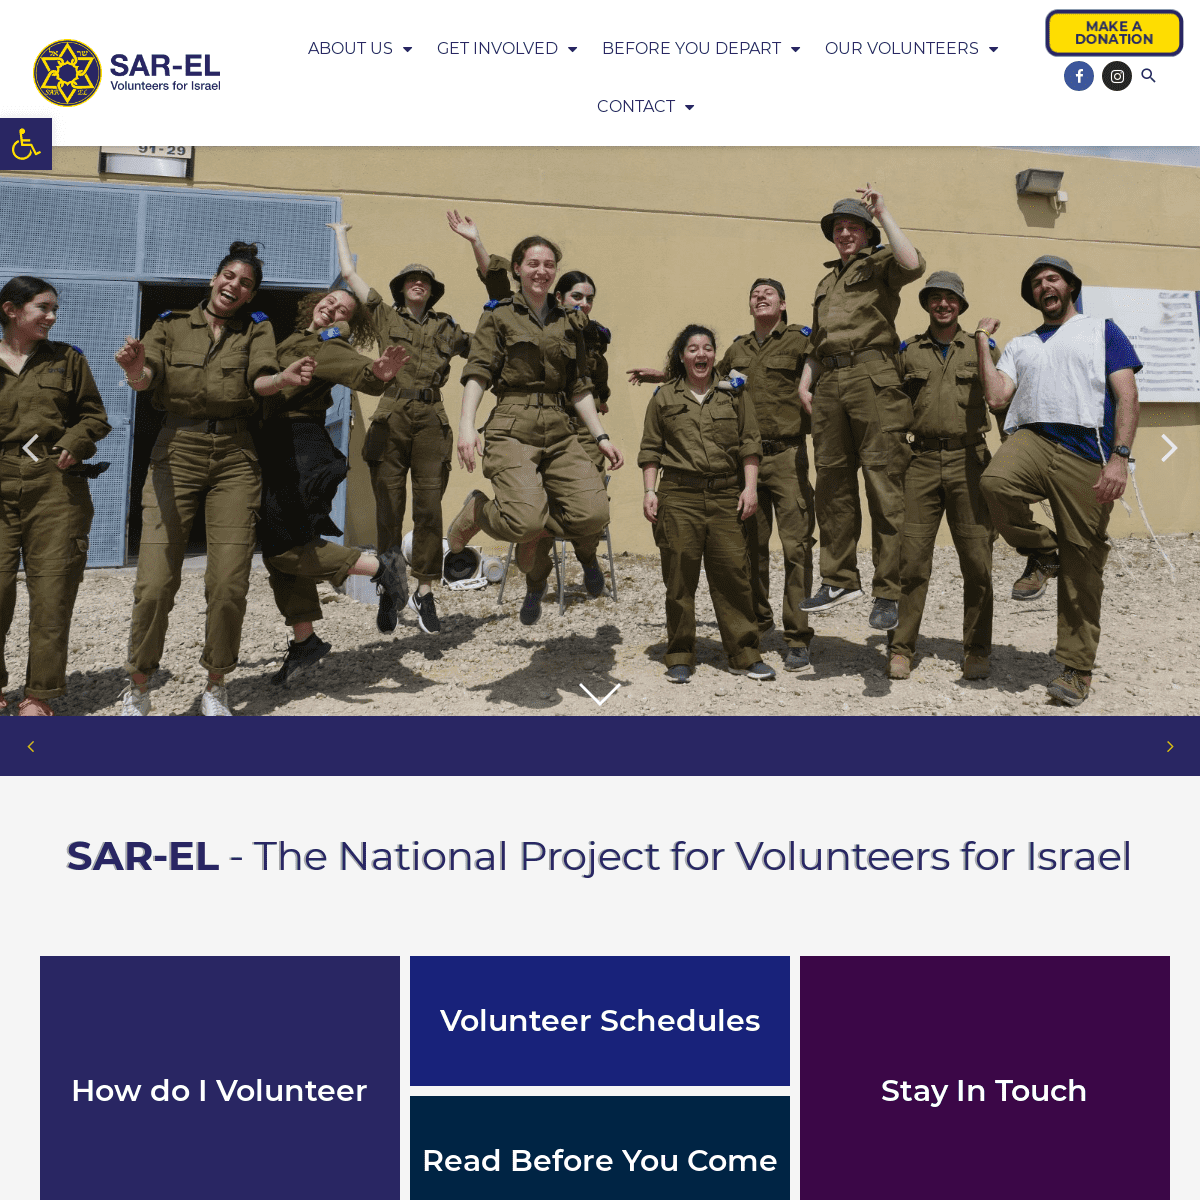 SAR-EL - The National Project for Volunteers for Israel